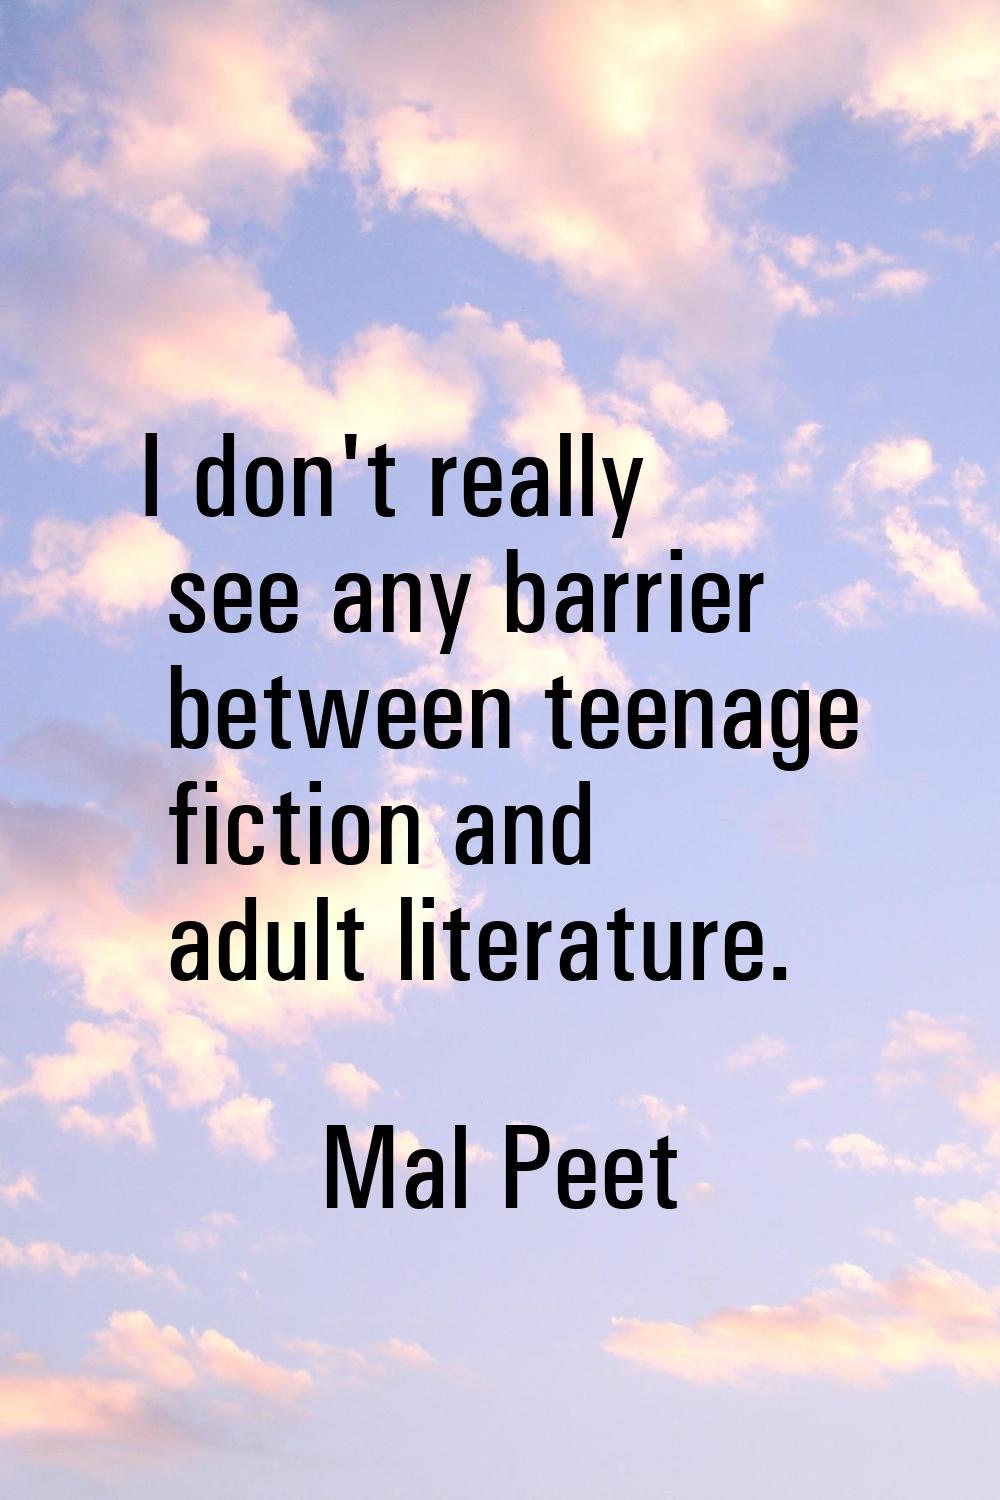 I don't really see any barrier between teenage fiction and adult literature.